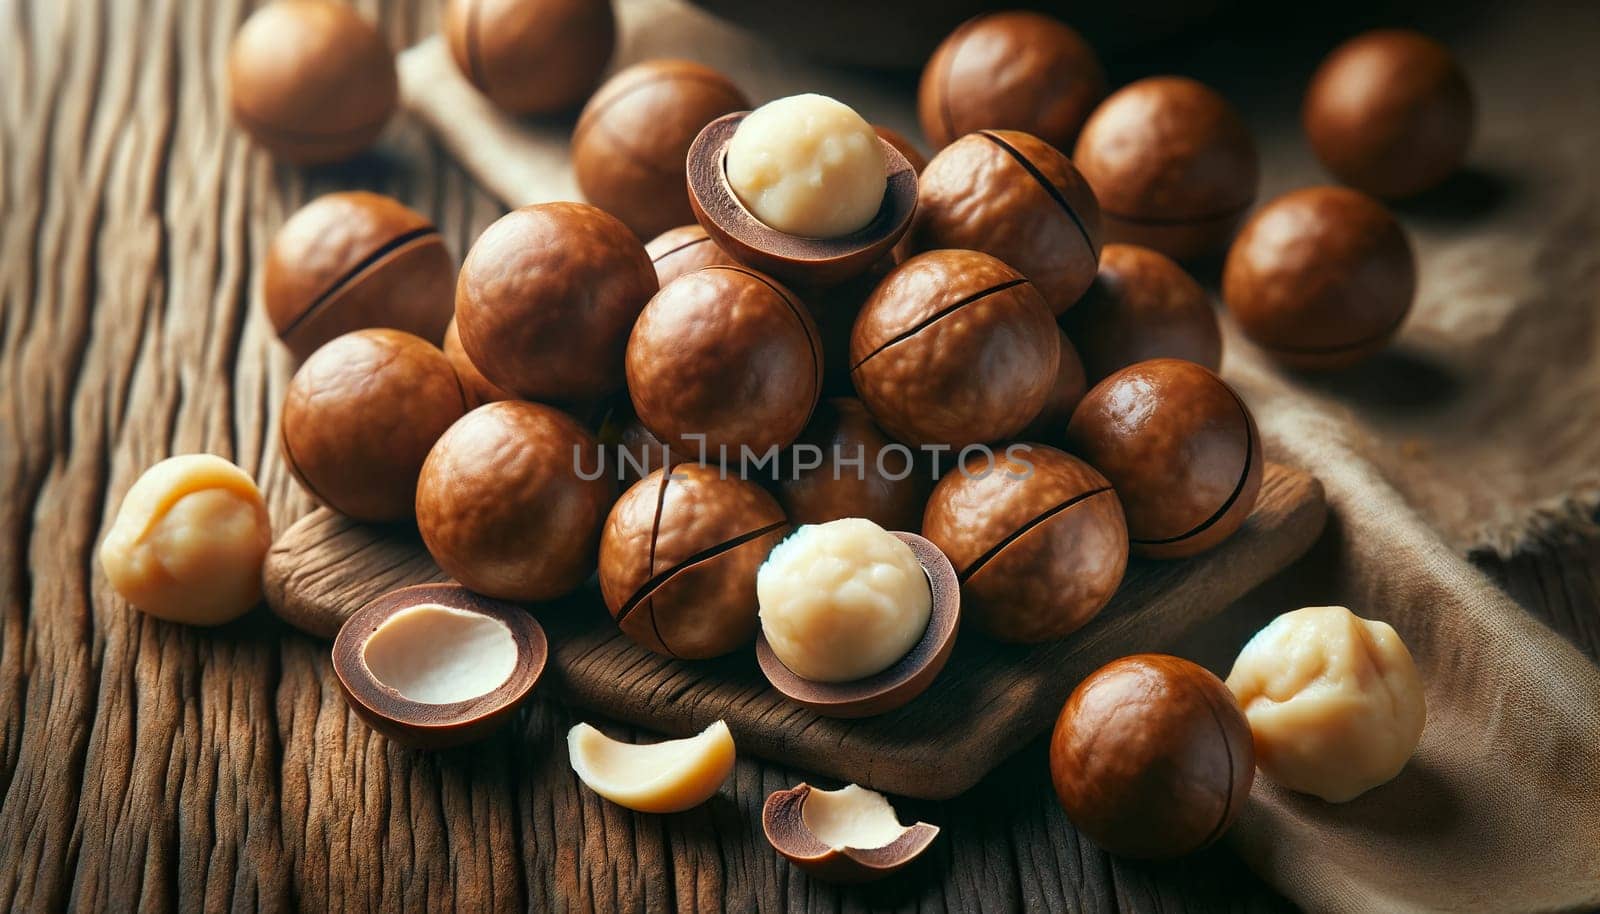 Macadamia nuts closeup on wooden table by Annado